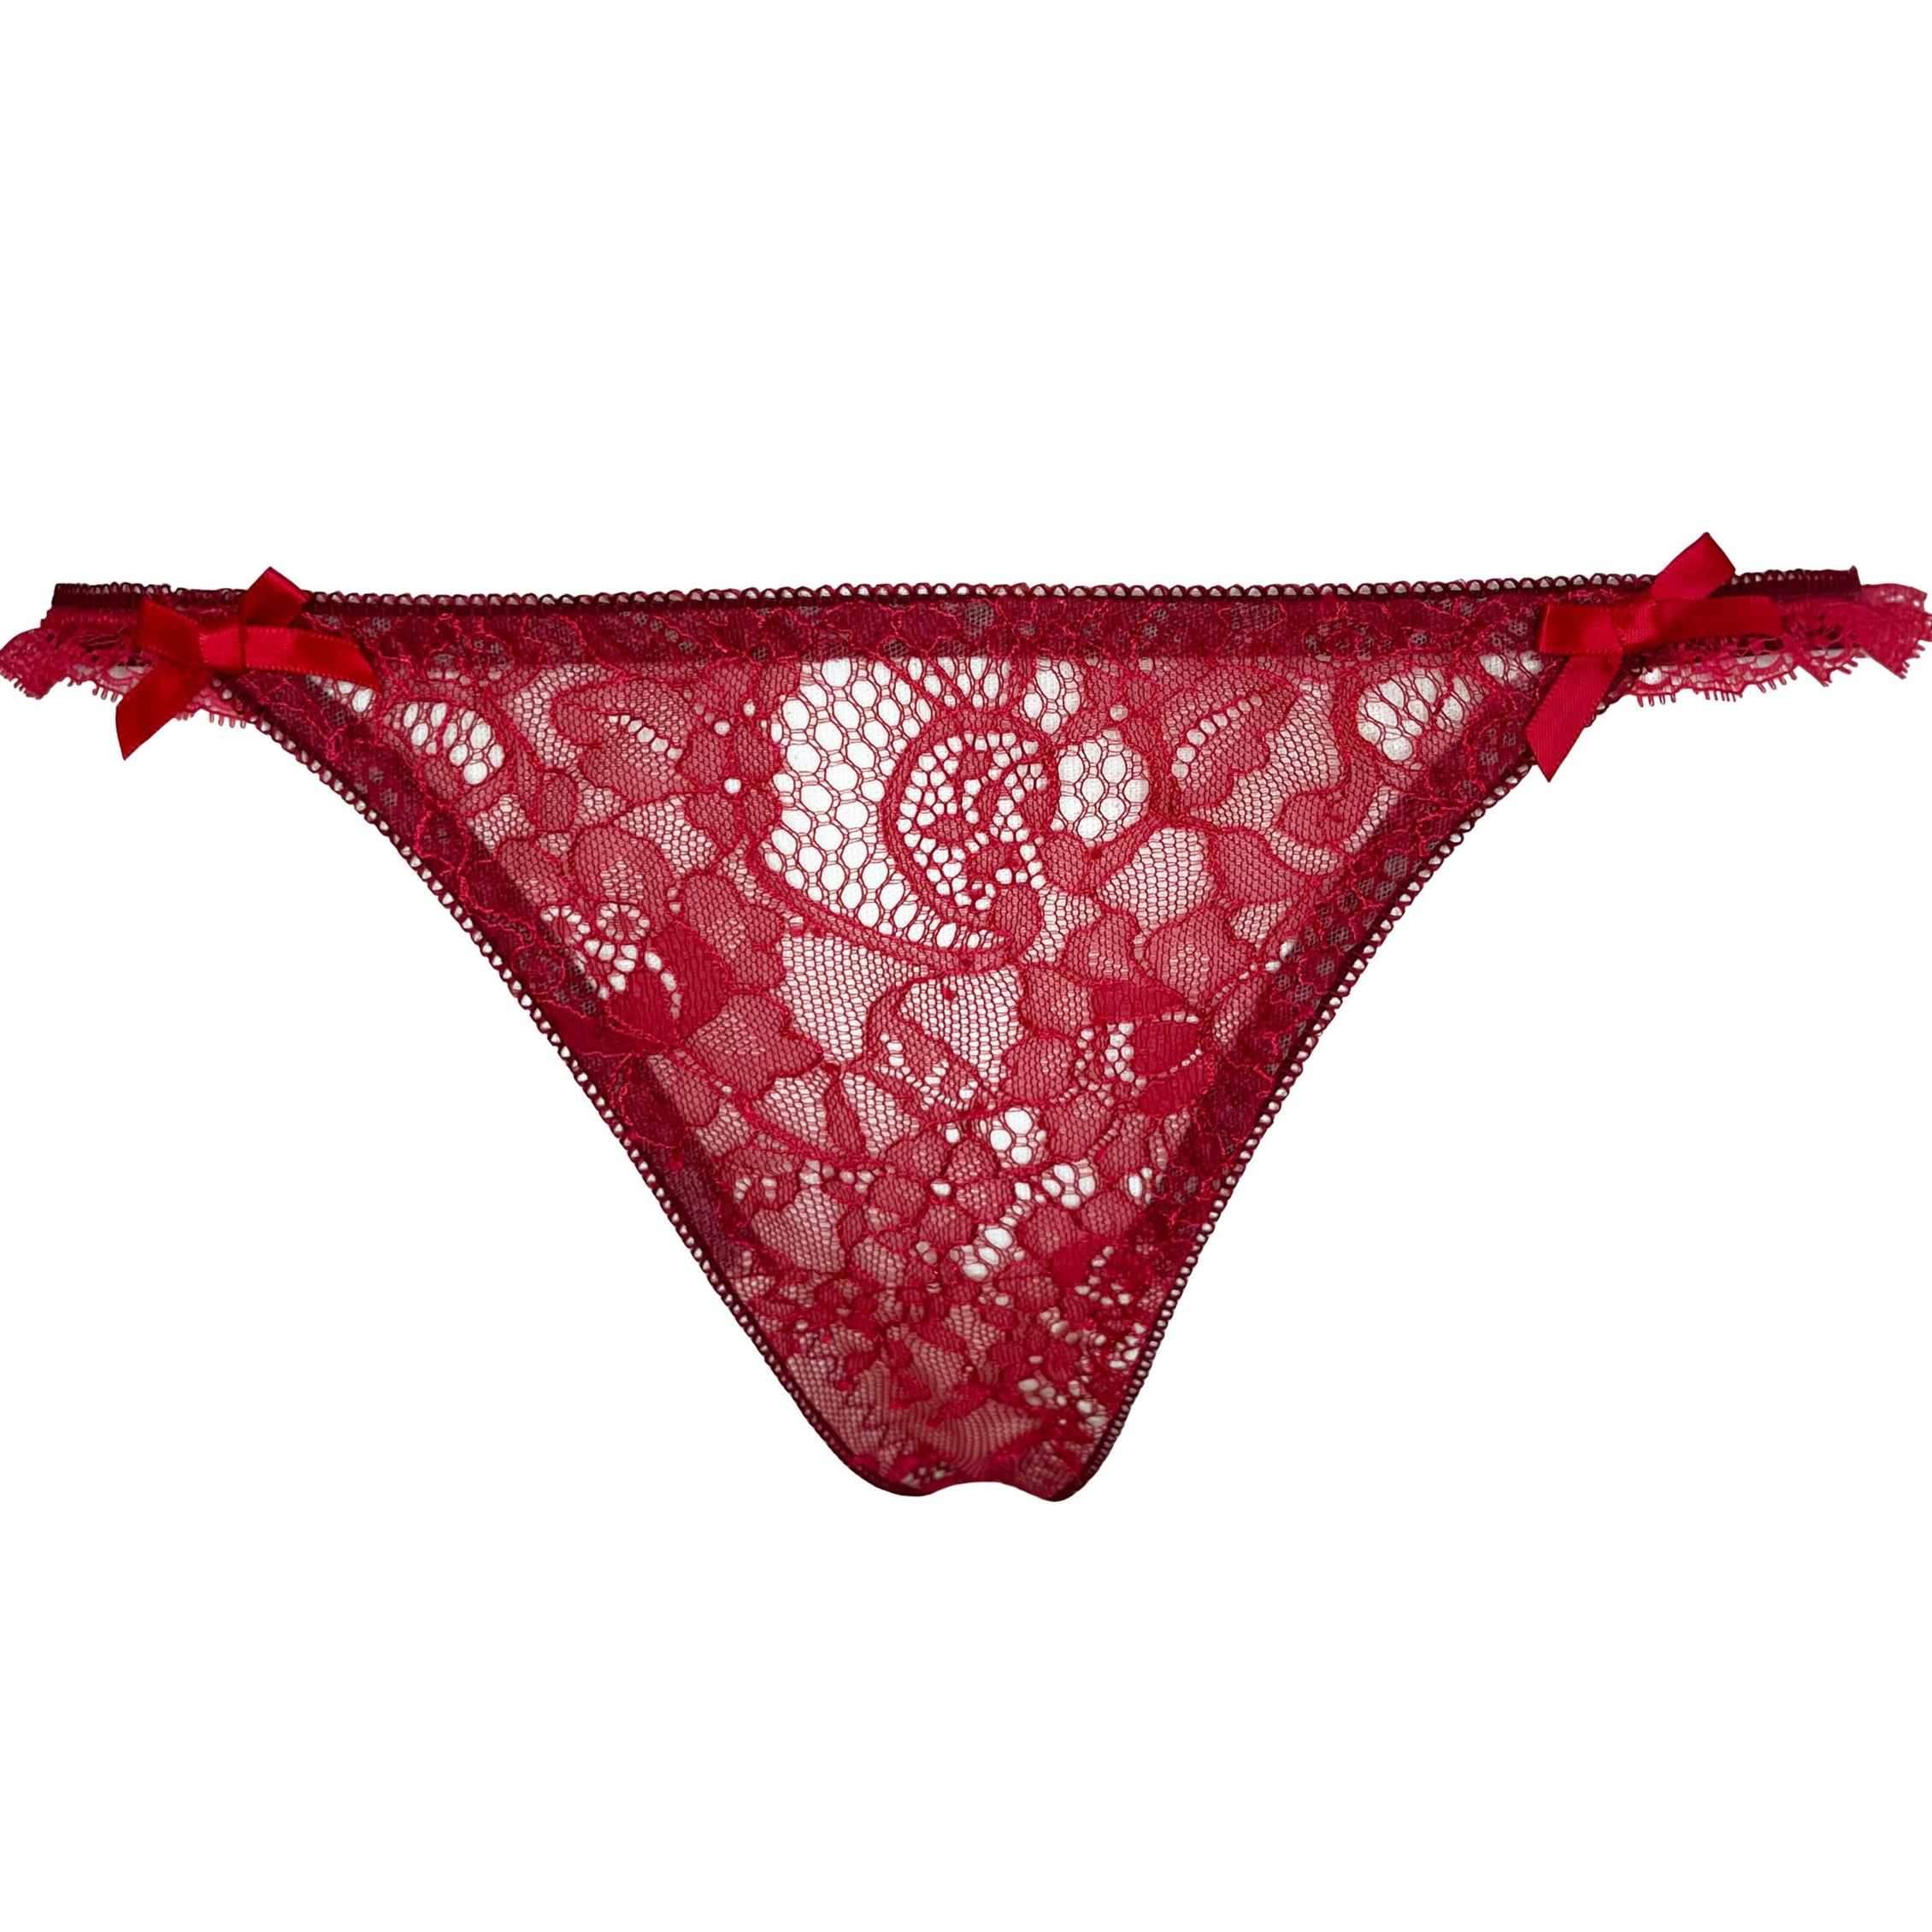 French lace thong in red – Ariane Delarue Lingerie